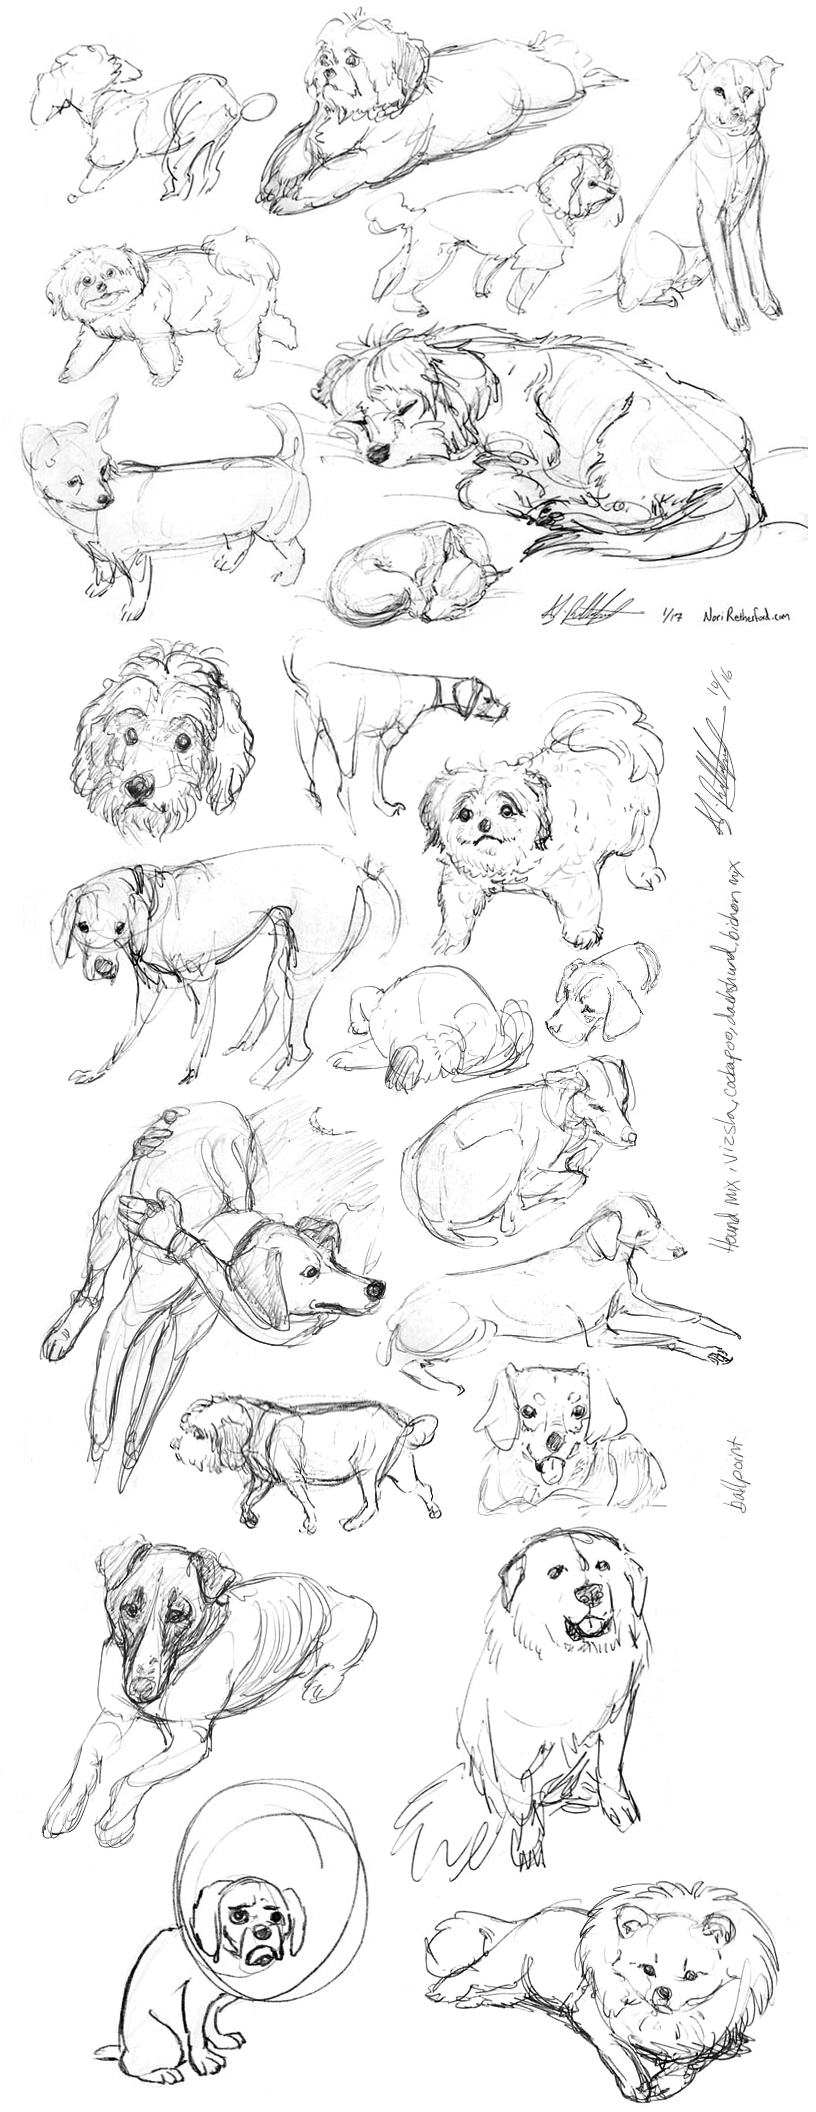 Life Drawing: Dogs!